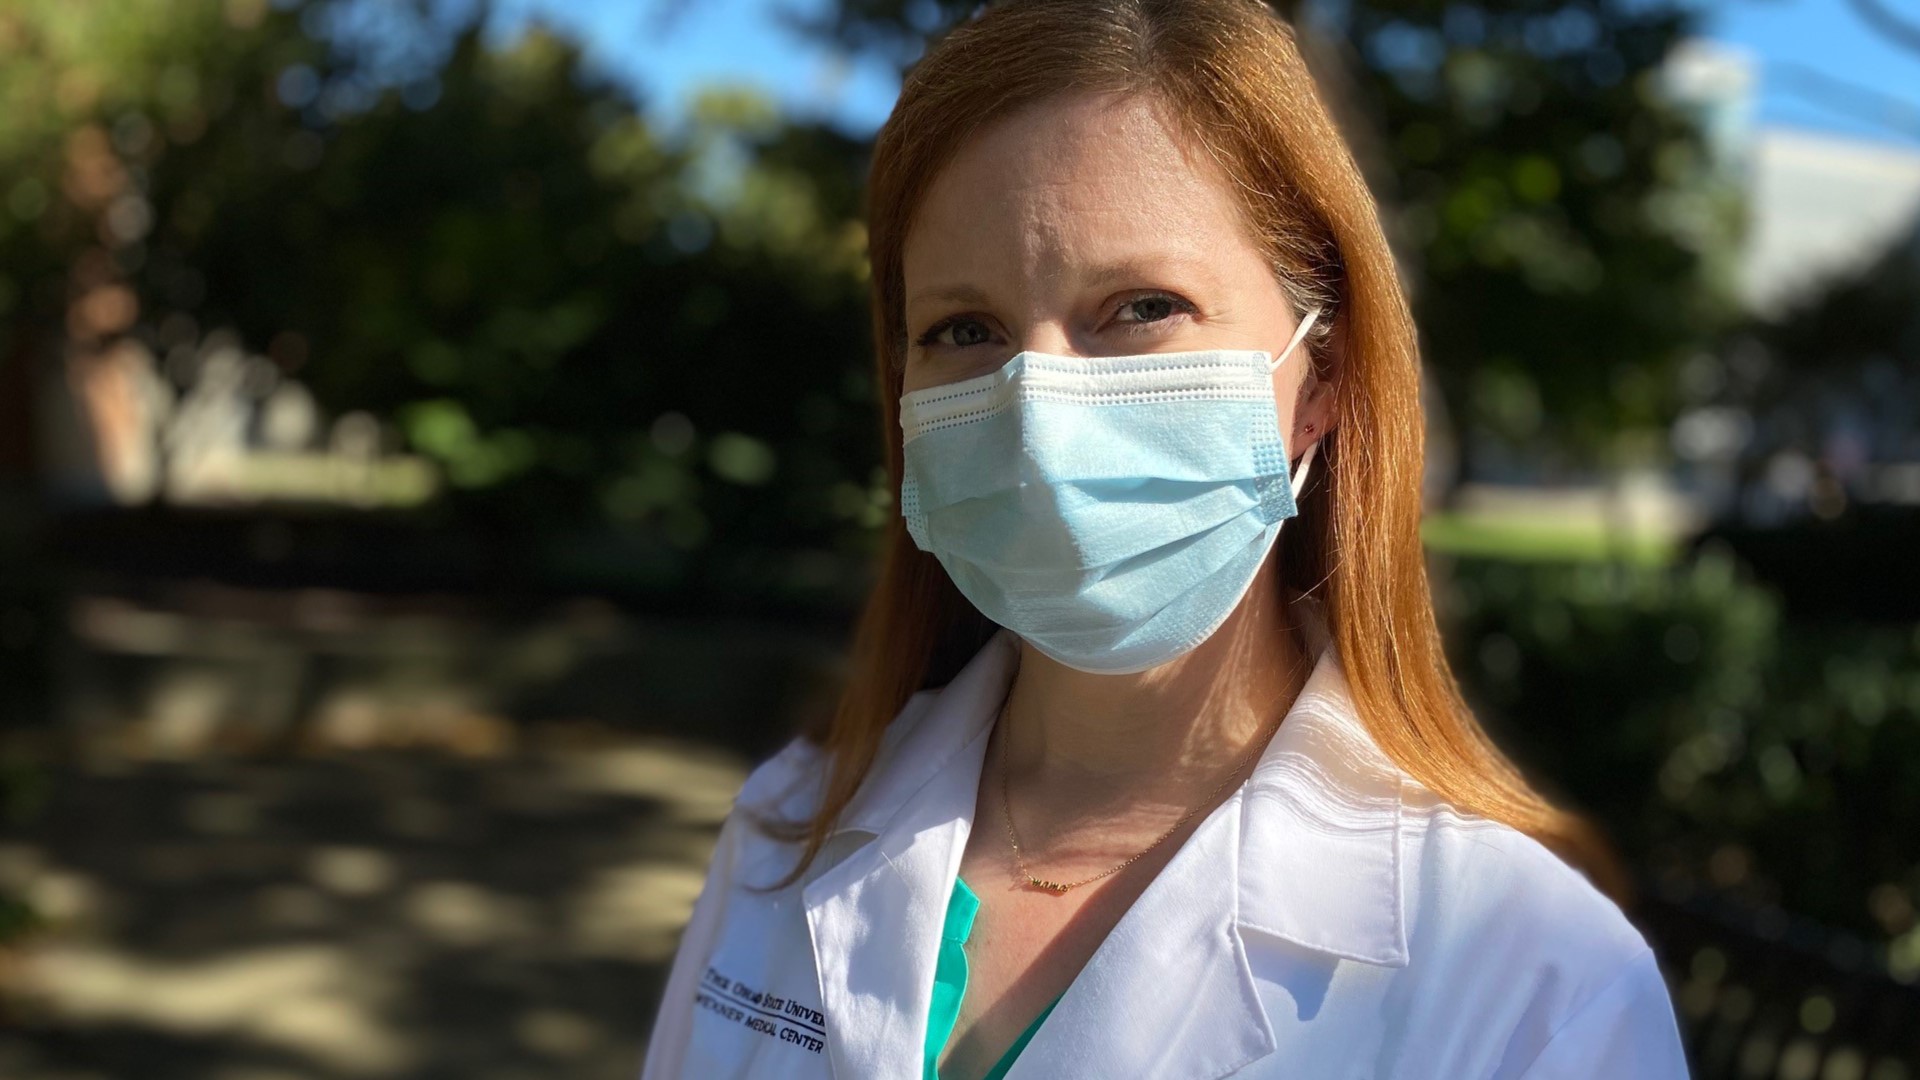 Dr. Colburn sees the pandemic through the lens of an infectious disease doctor & a new mom. The last month of the pandemic has been the most challenging for her yet.